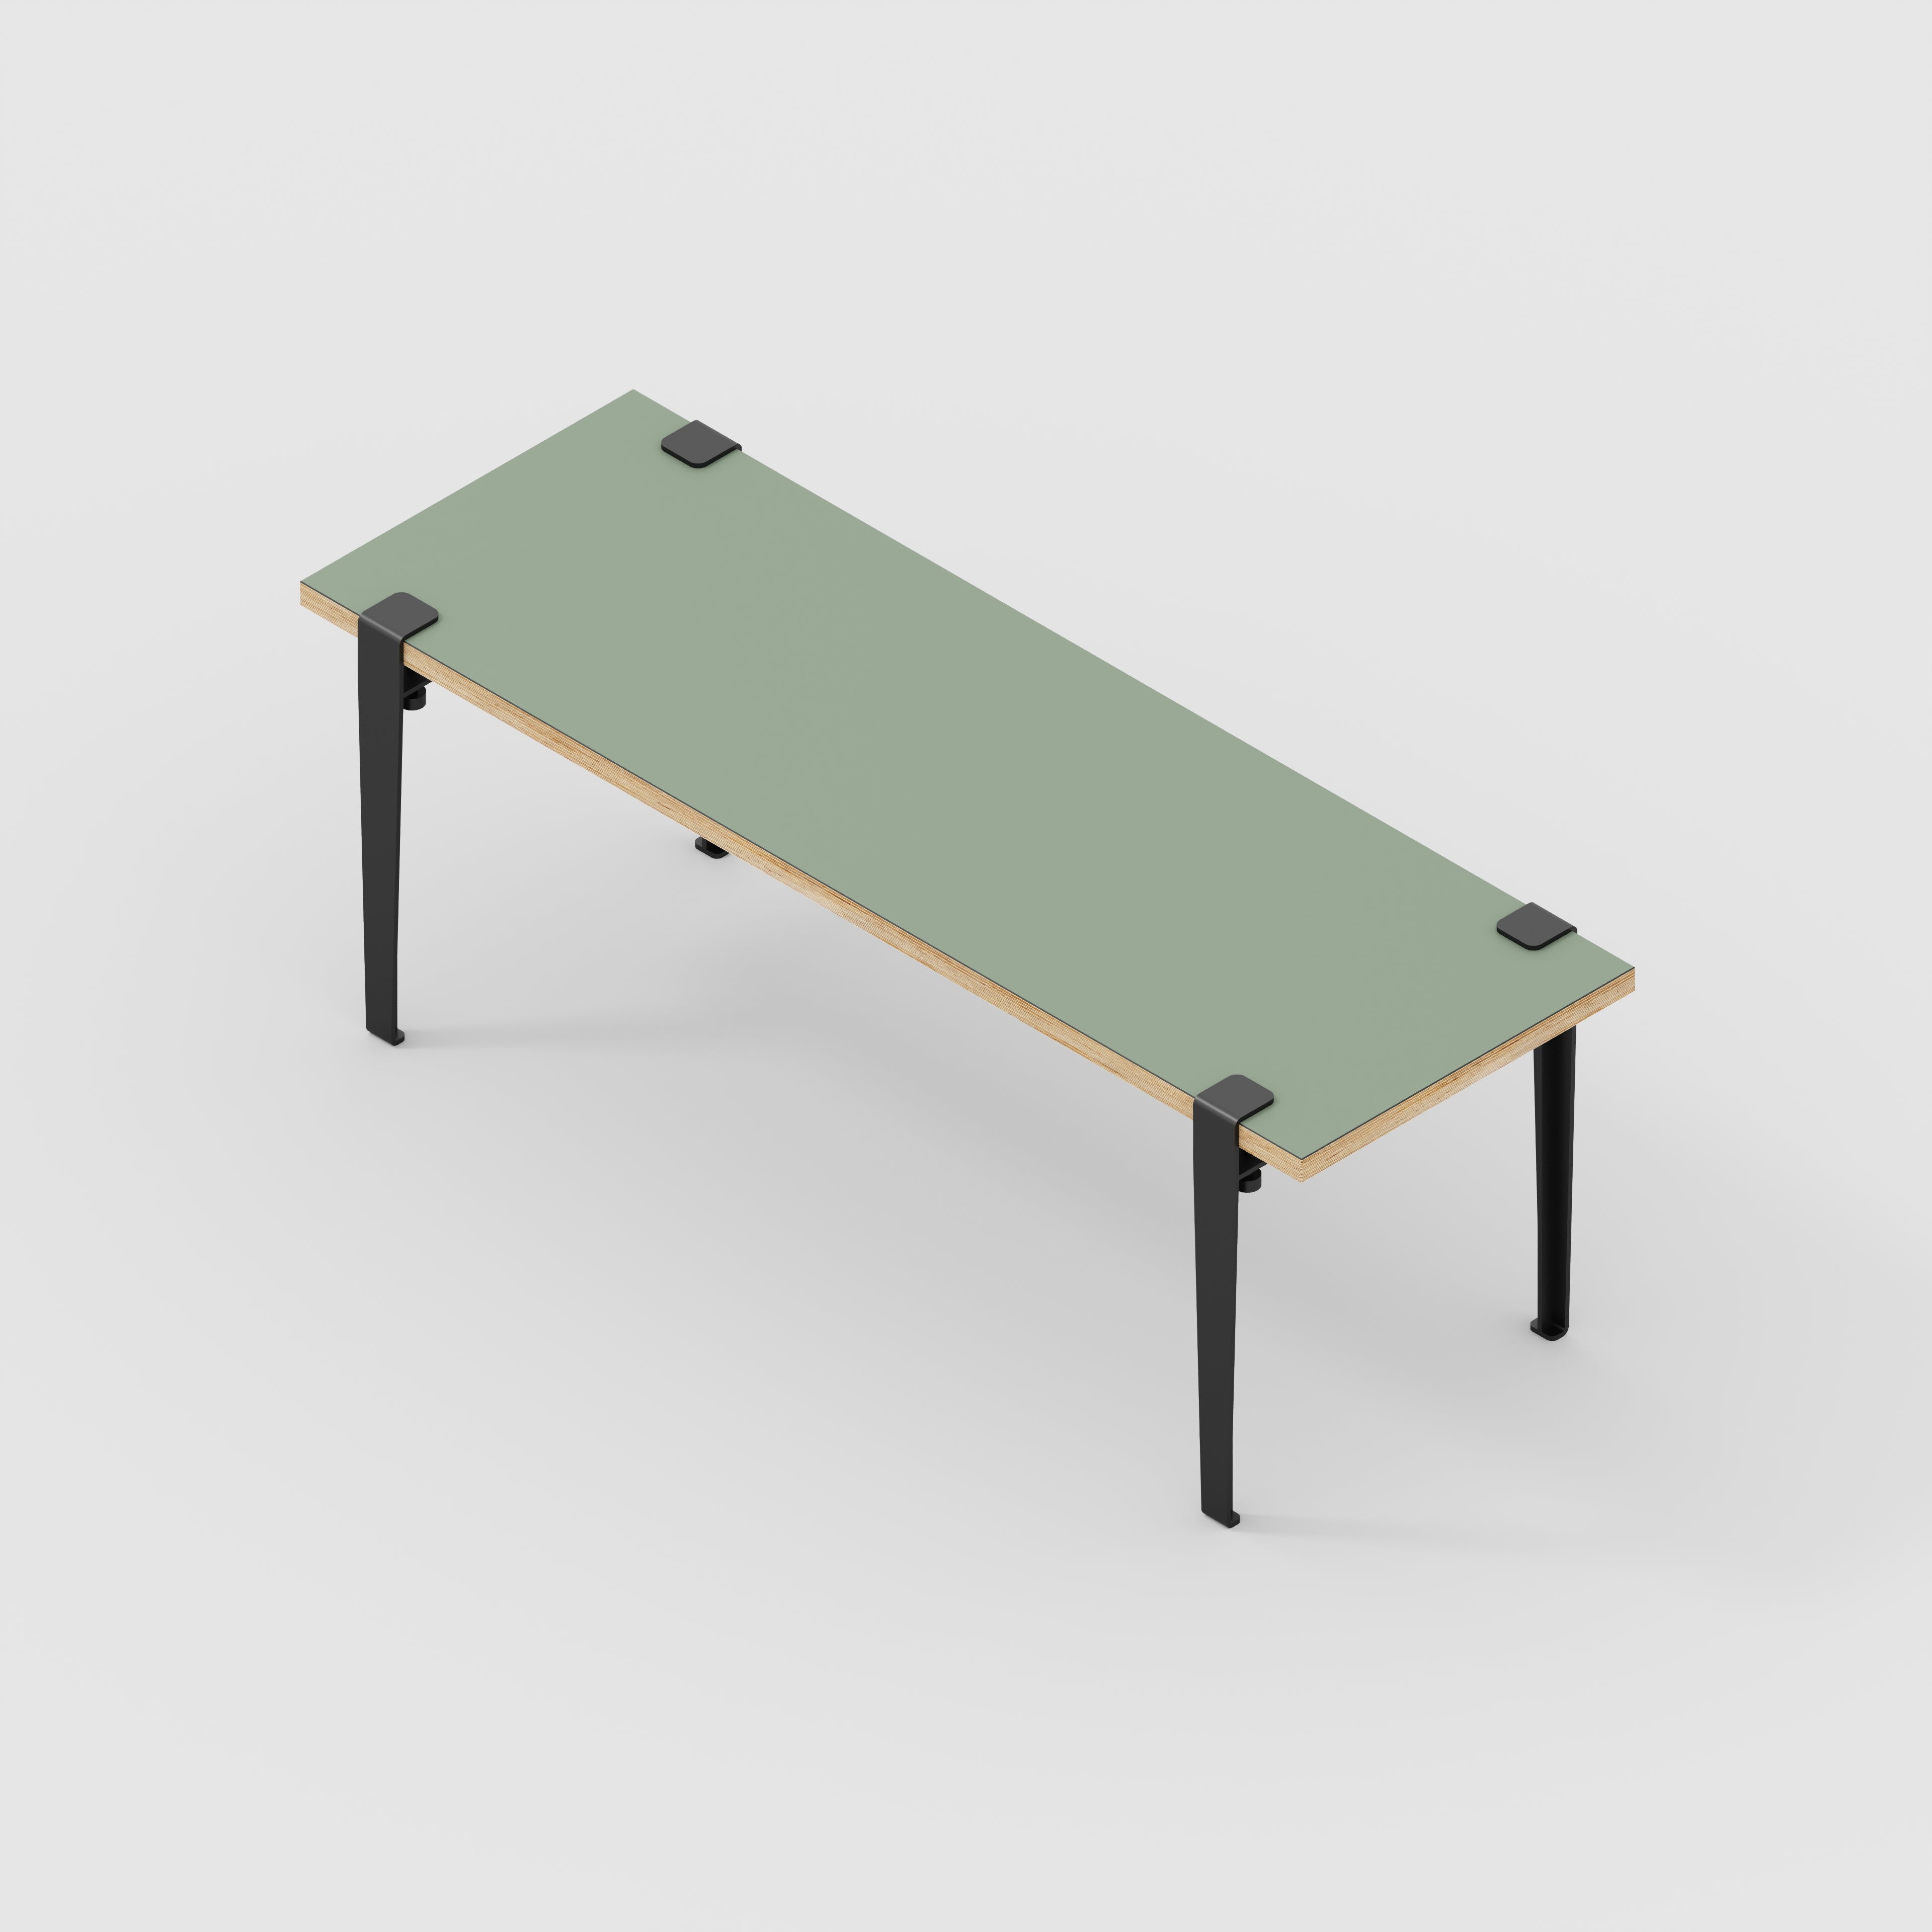 Bench Seat with Black Tiptoe Legs - Formica Green Slate - 1200(w) x 400(d) x 450(h)